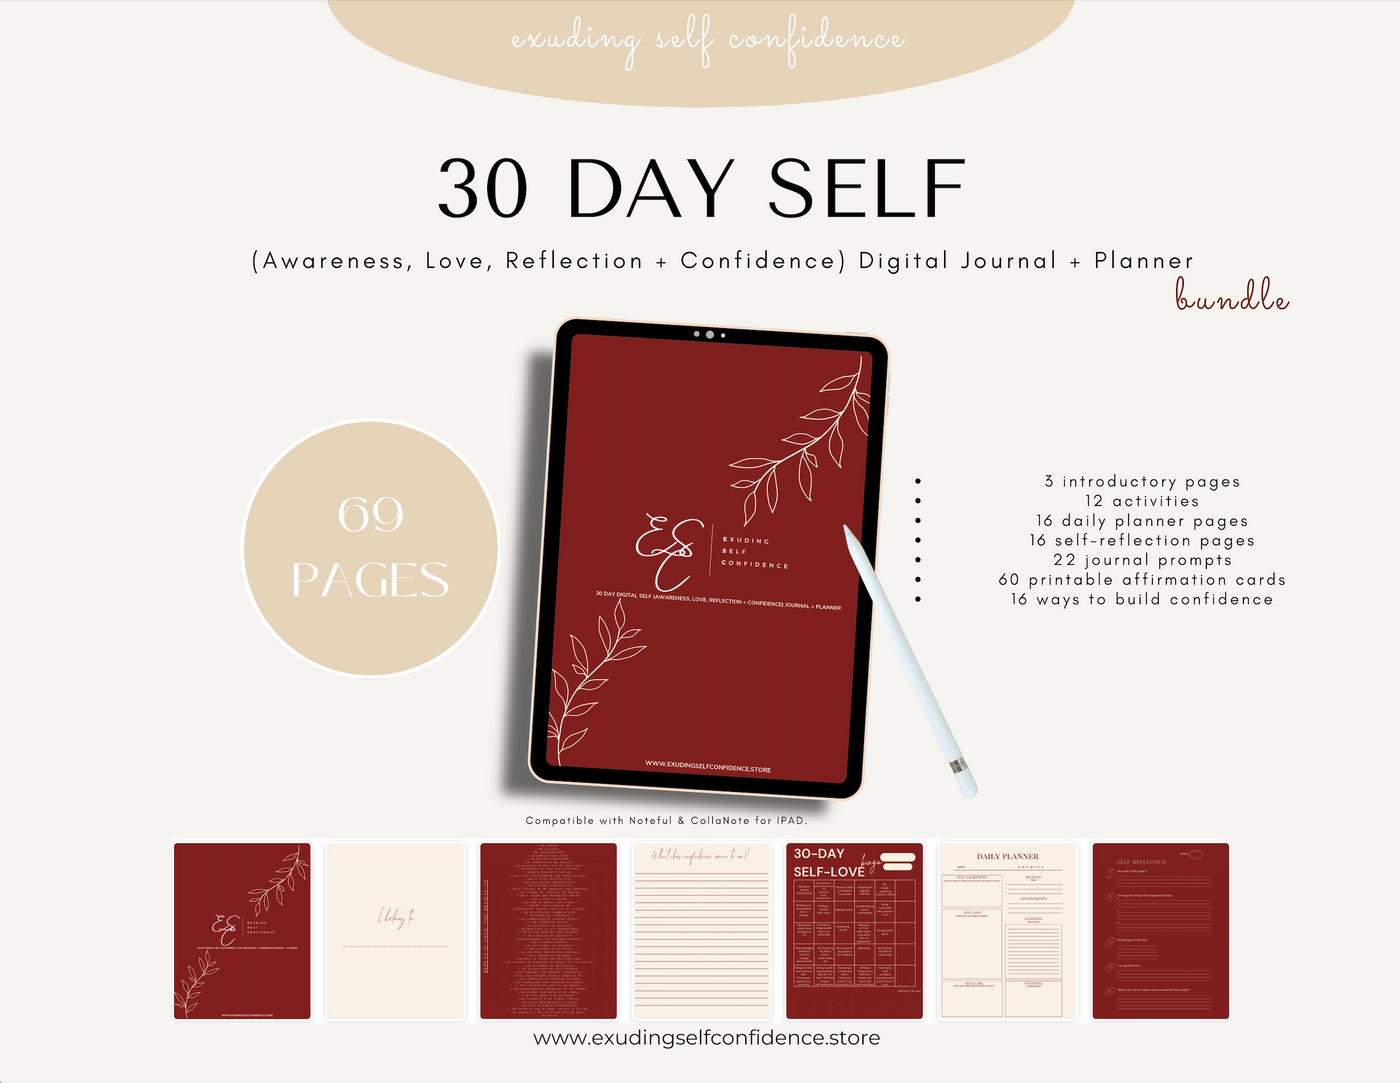 Exuding Self Confidence 30-Day Digital Self (Awareness, Love, Reflection + Confidence) Journal and Planner PDF Download for IPAD